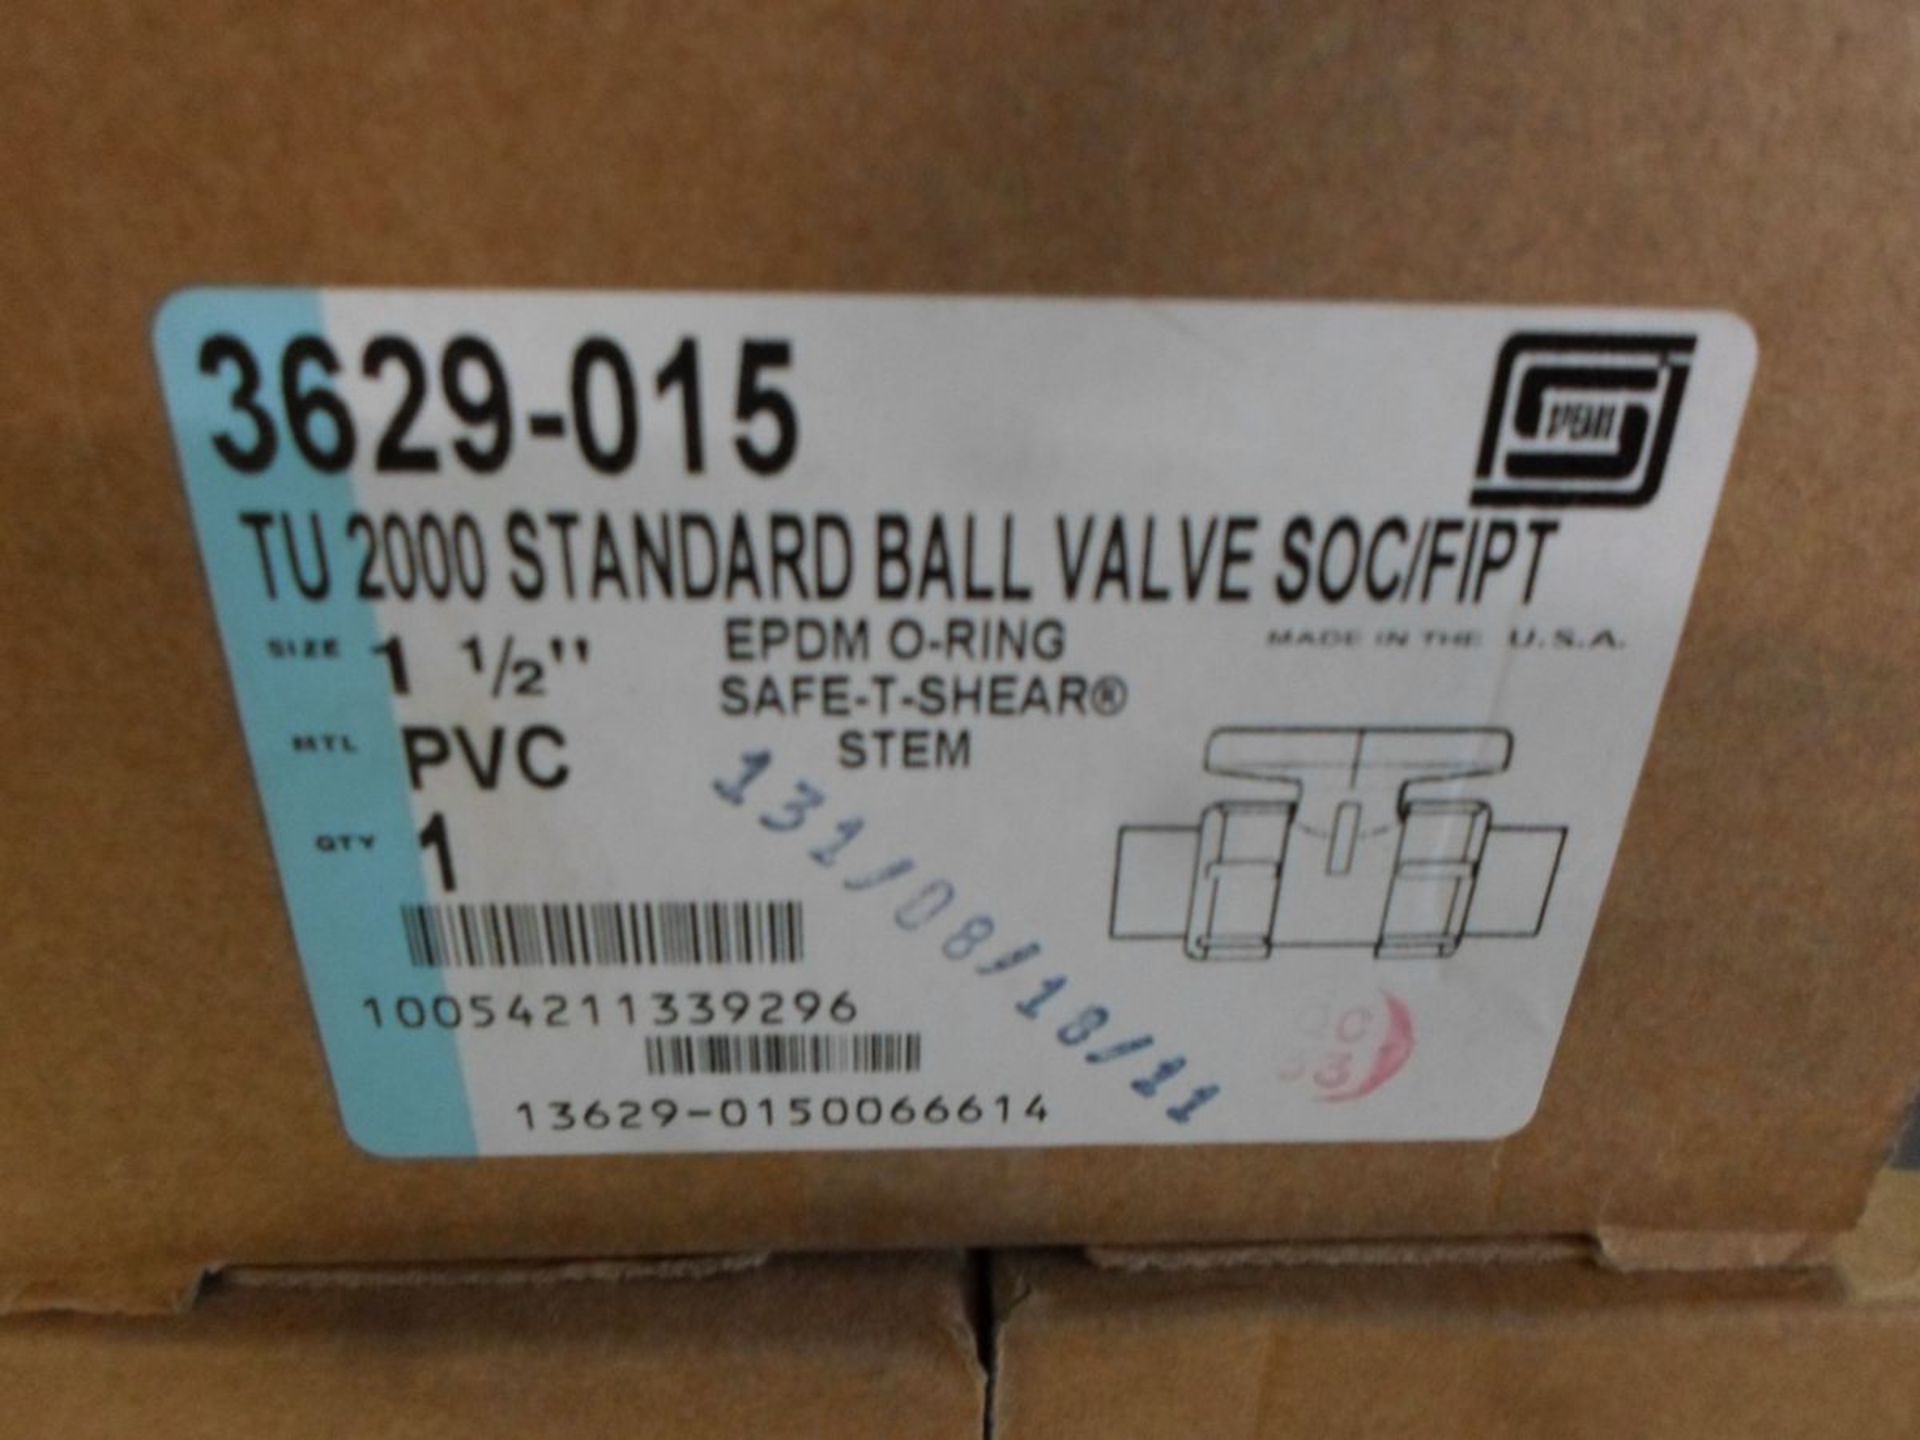 LOT OF FIVE NEW BOXES SPEARS 3629-015 TU 2000 STANDARD BALL VALVE 1 1/2" ONE IN EACH BOX - Image 2 of 2